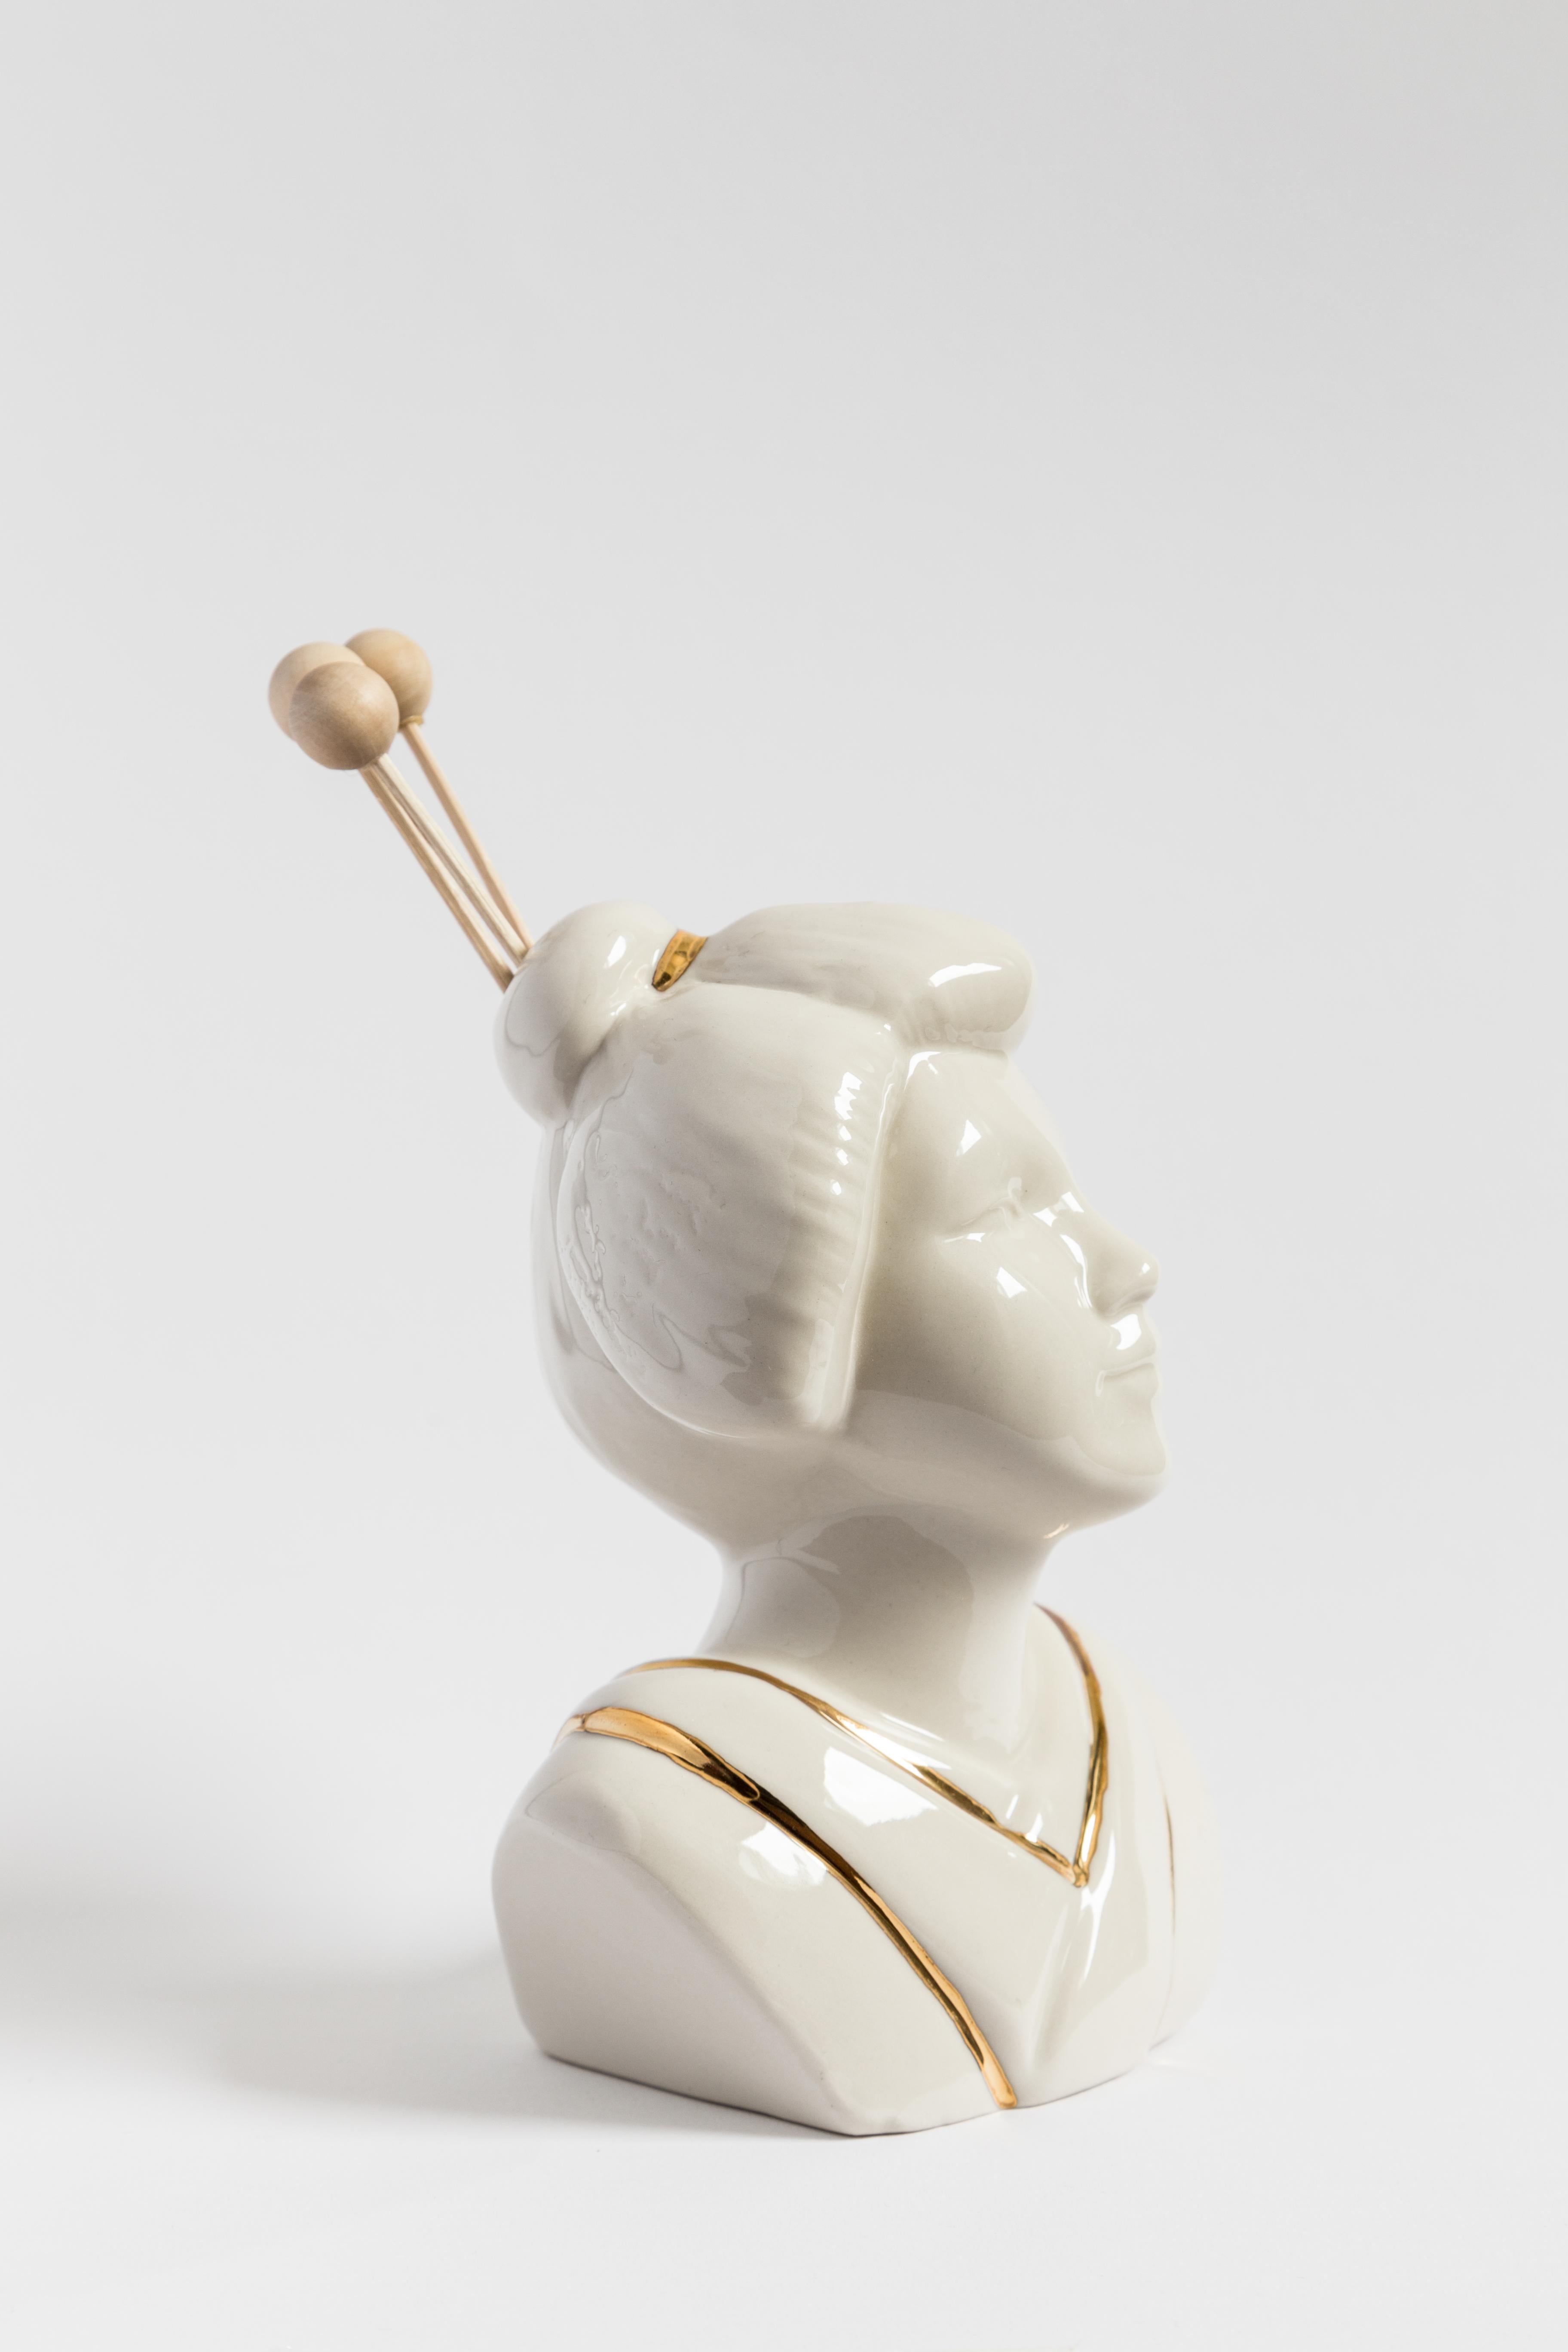 This Italian porcelain sculpture is part of Grand Tour by Vito Nesta. Made in Capodimonte porcelain with a glossy finish and gold detail, this sculpture is an essential oil diffuser and is shaped like a Japanese woman.